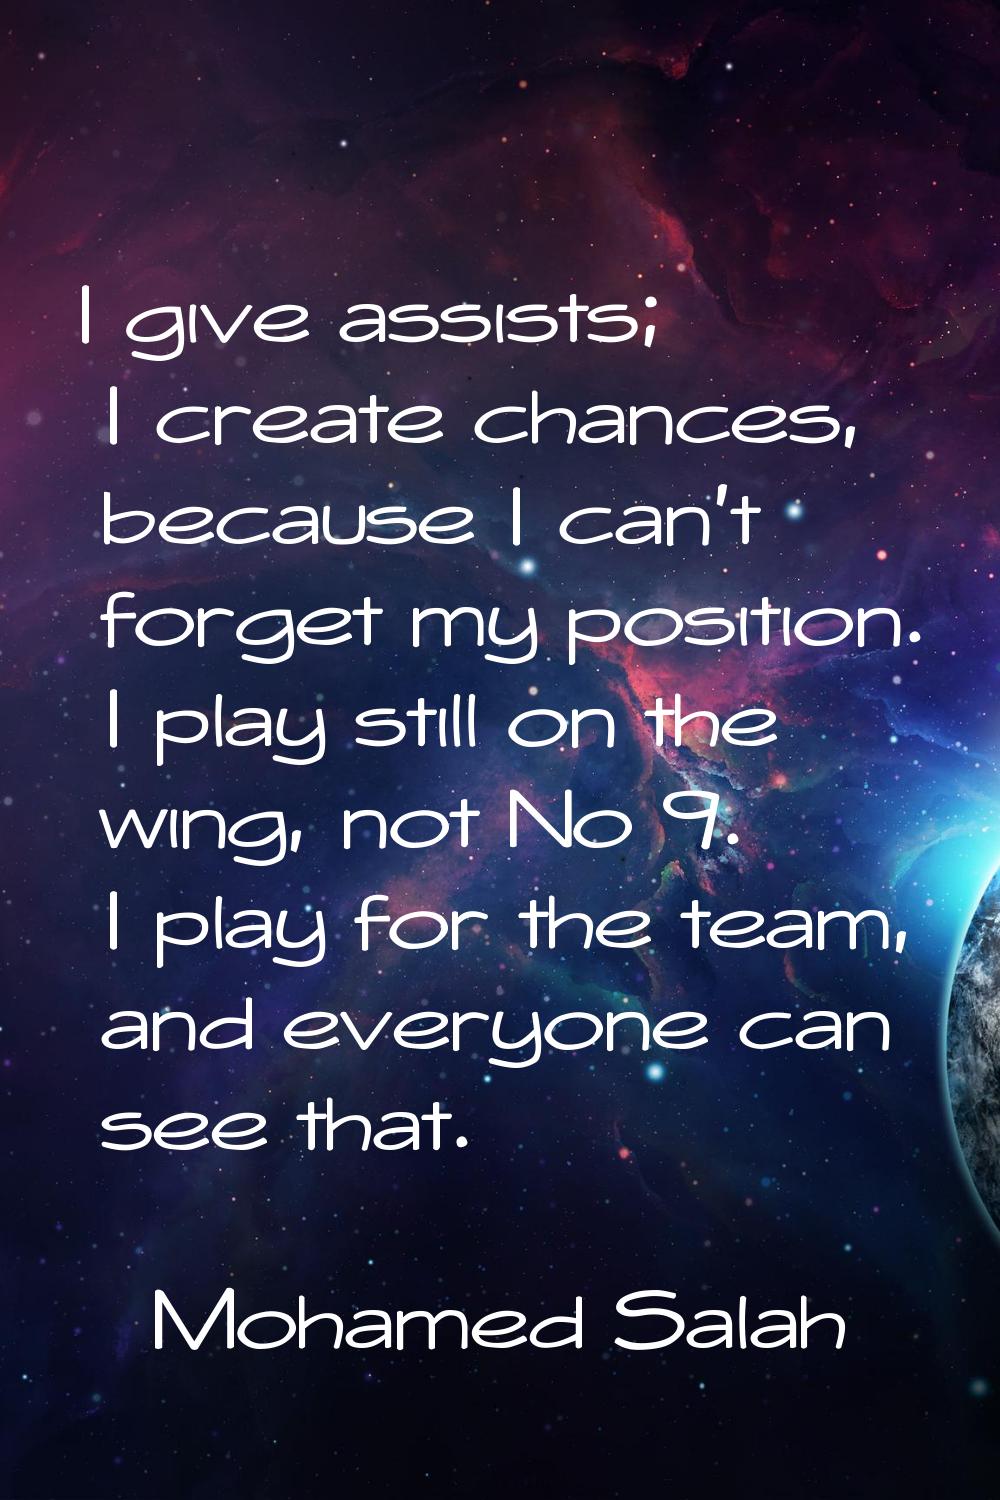 I give assists; I create chances, because I can't forget my position. I play still on the wing, not